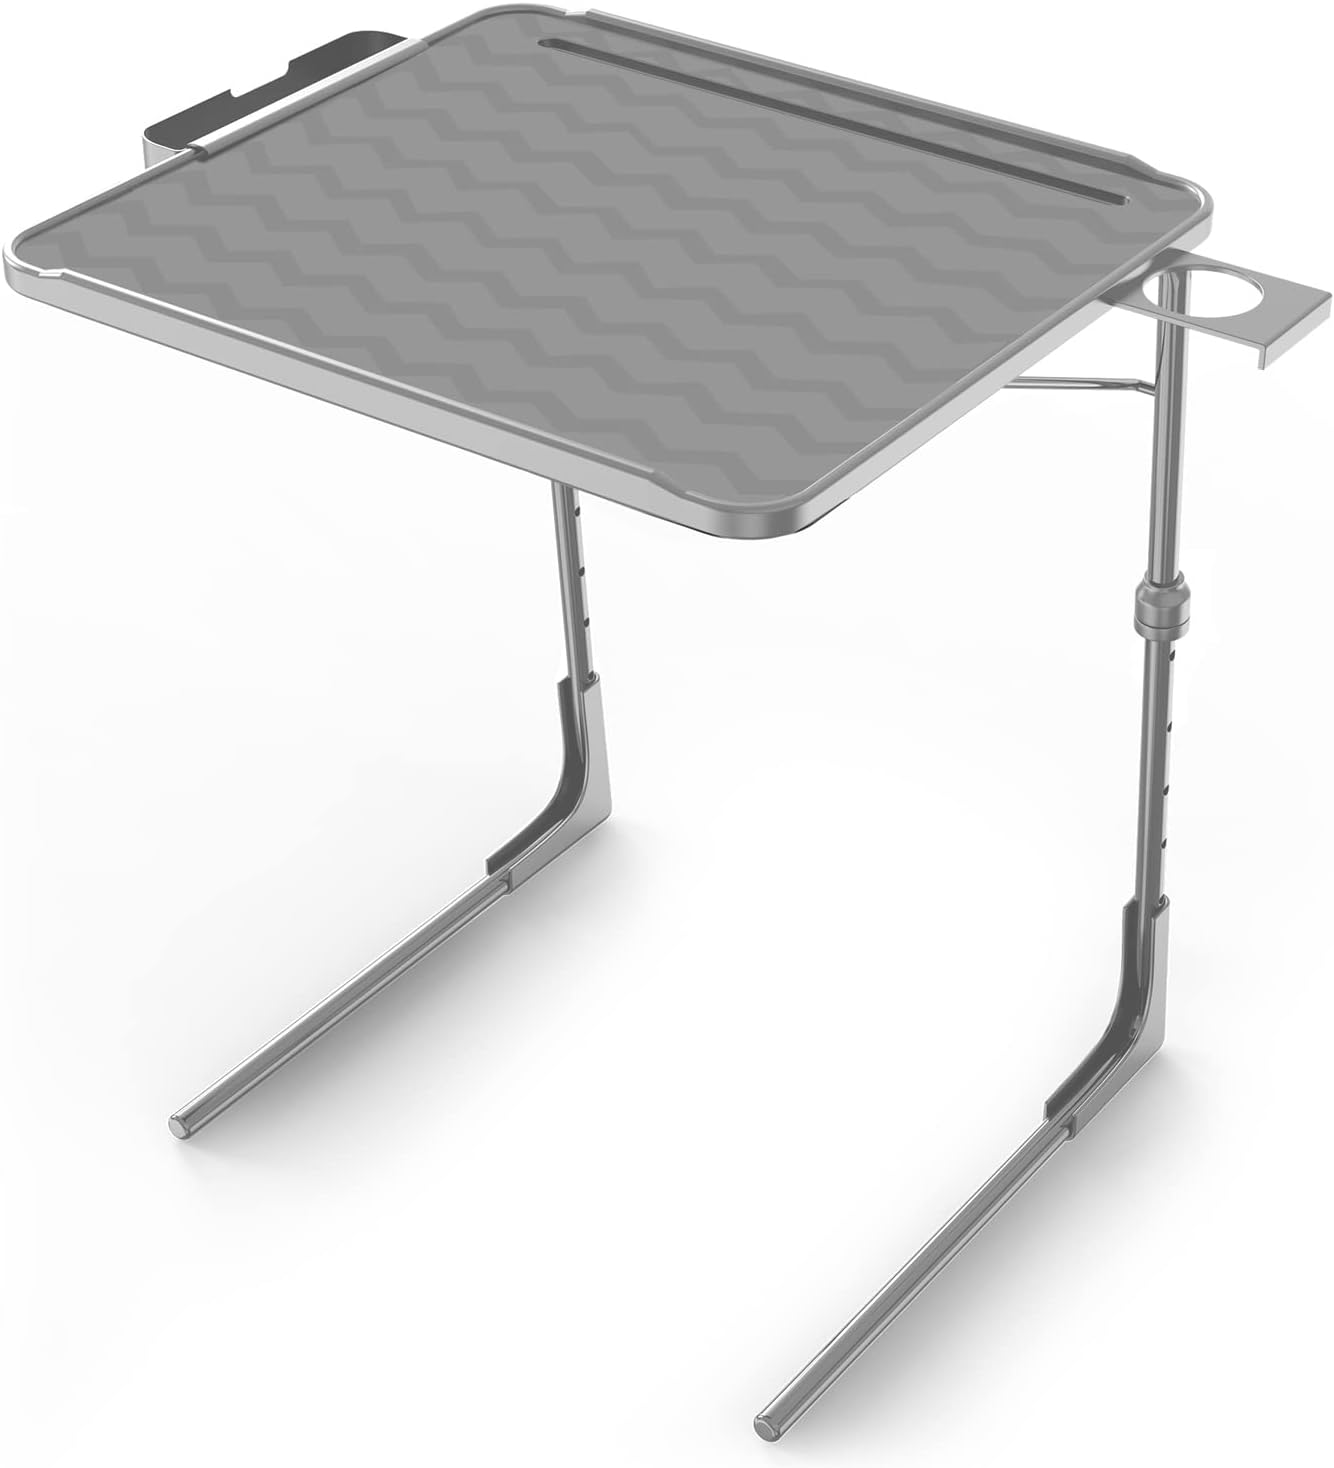 https://bigbigmart.com/wp-content/uploads/2023/09/Table-Mate-XL-PRO-TV-Table-Tray-Portable-Adjustable-Folding-Trays-for-Eating-or-Work-Laptop-Slate-Gray.jpg